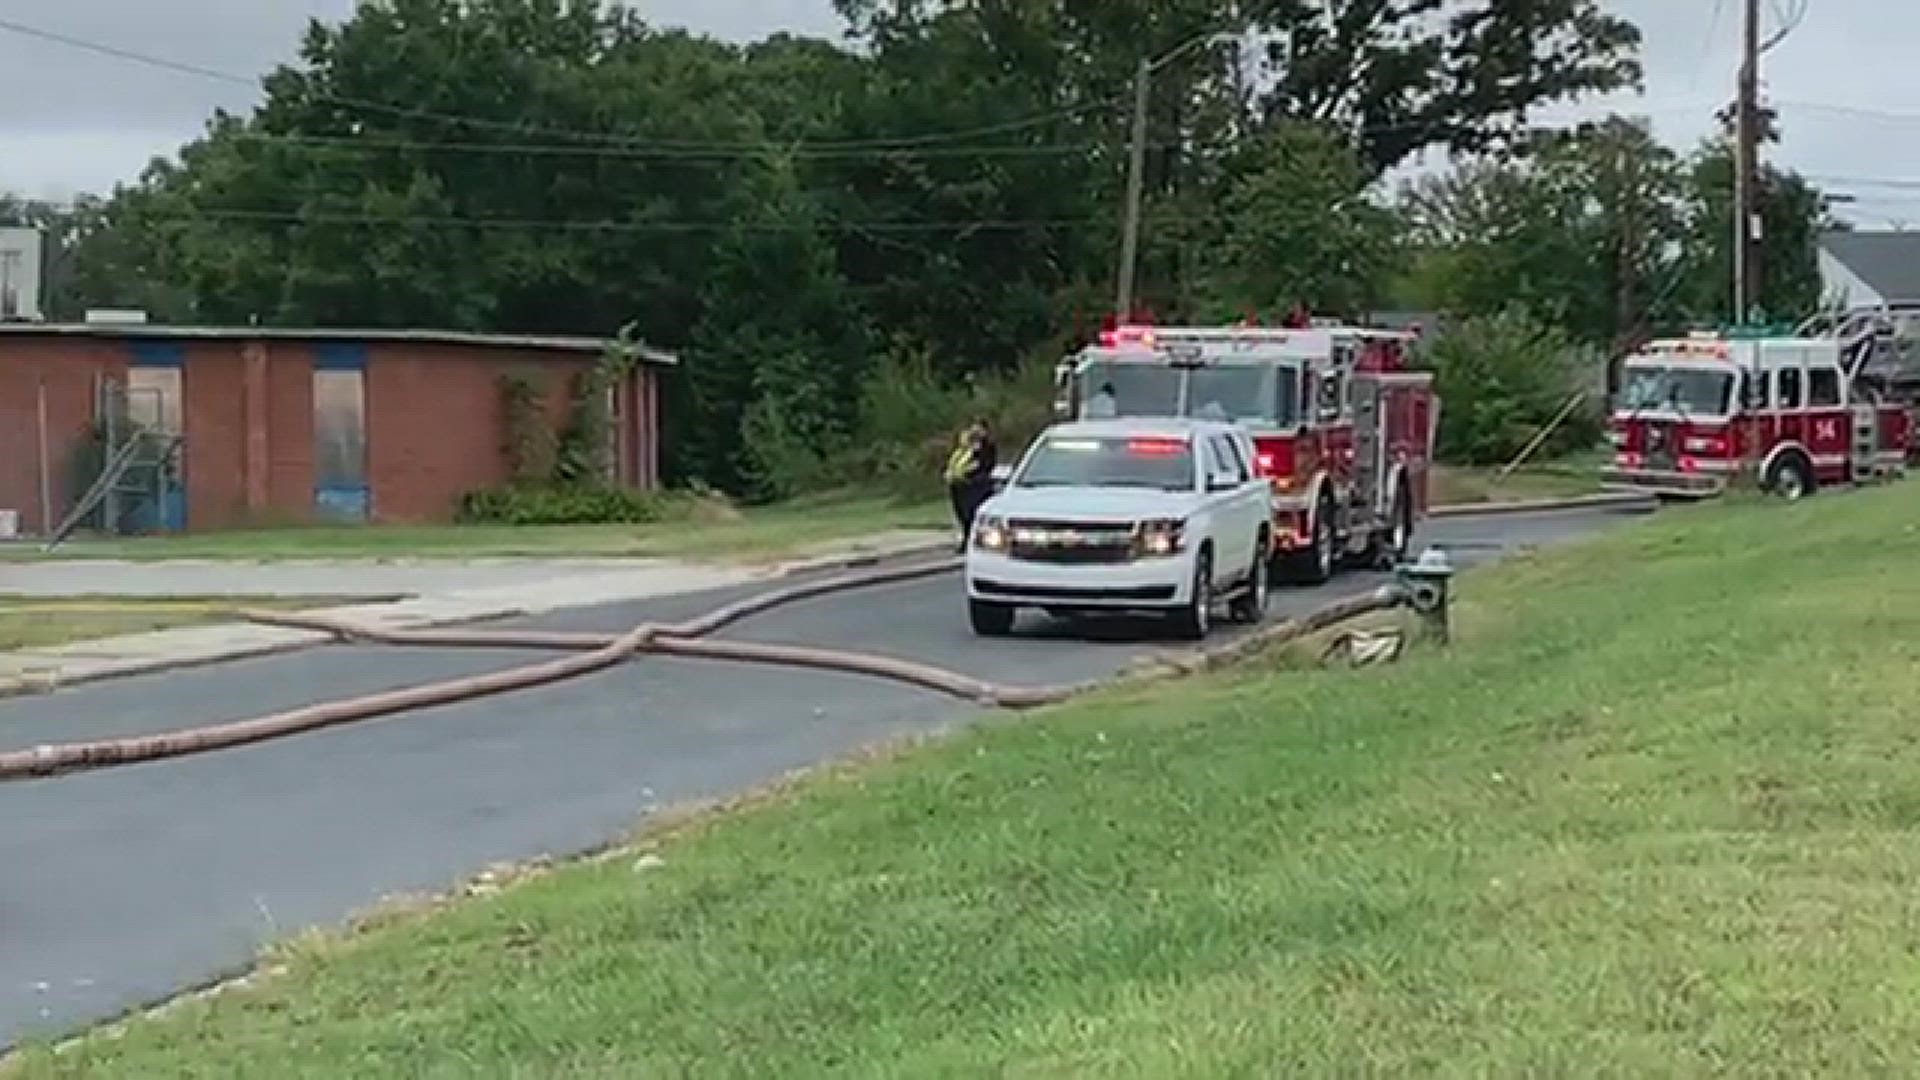 Greensboro firefighters were called to a fire at Peeler Elementary School Thursday afternoon.